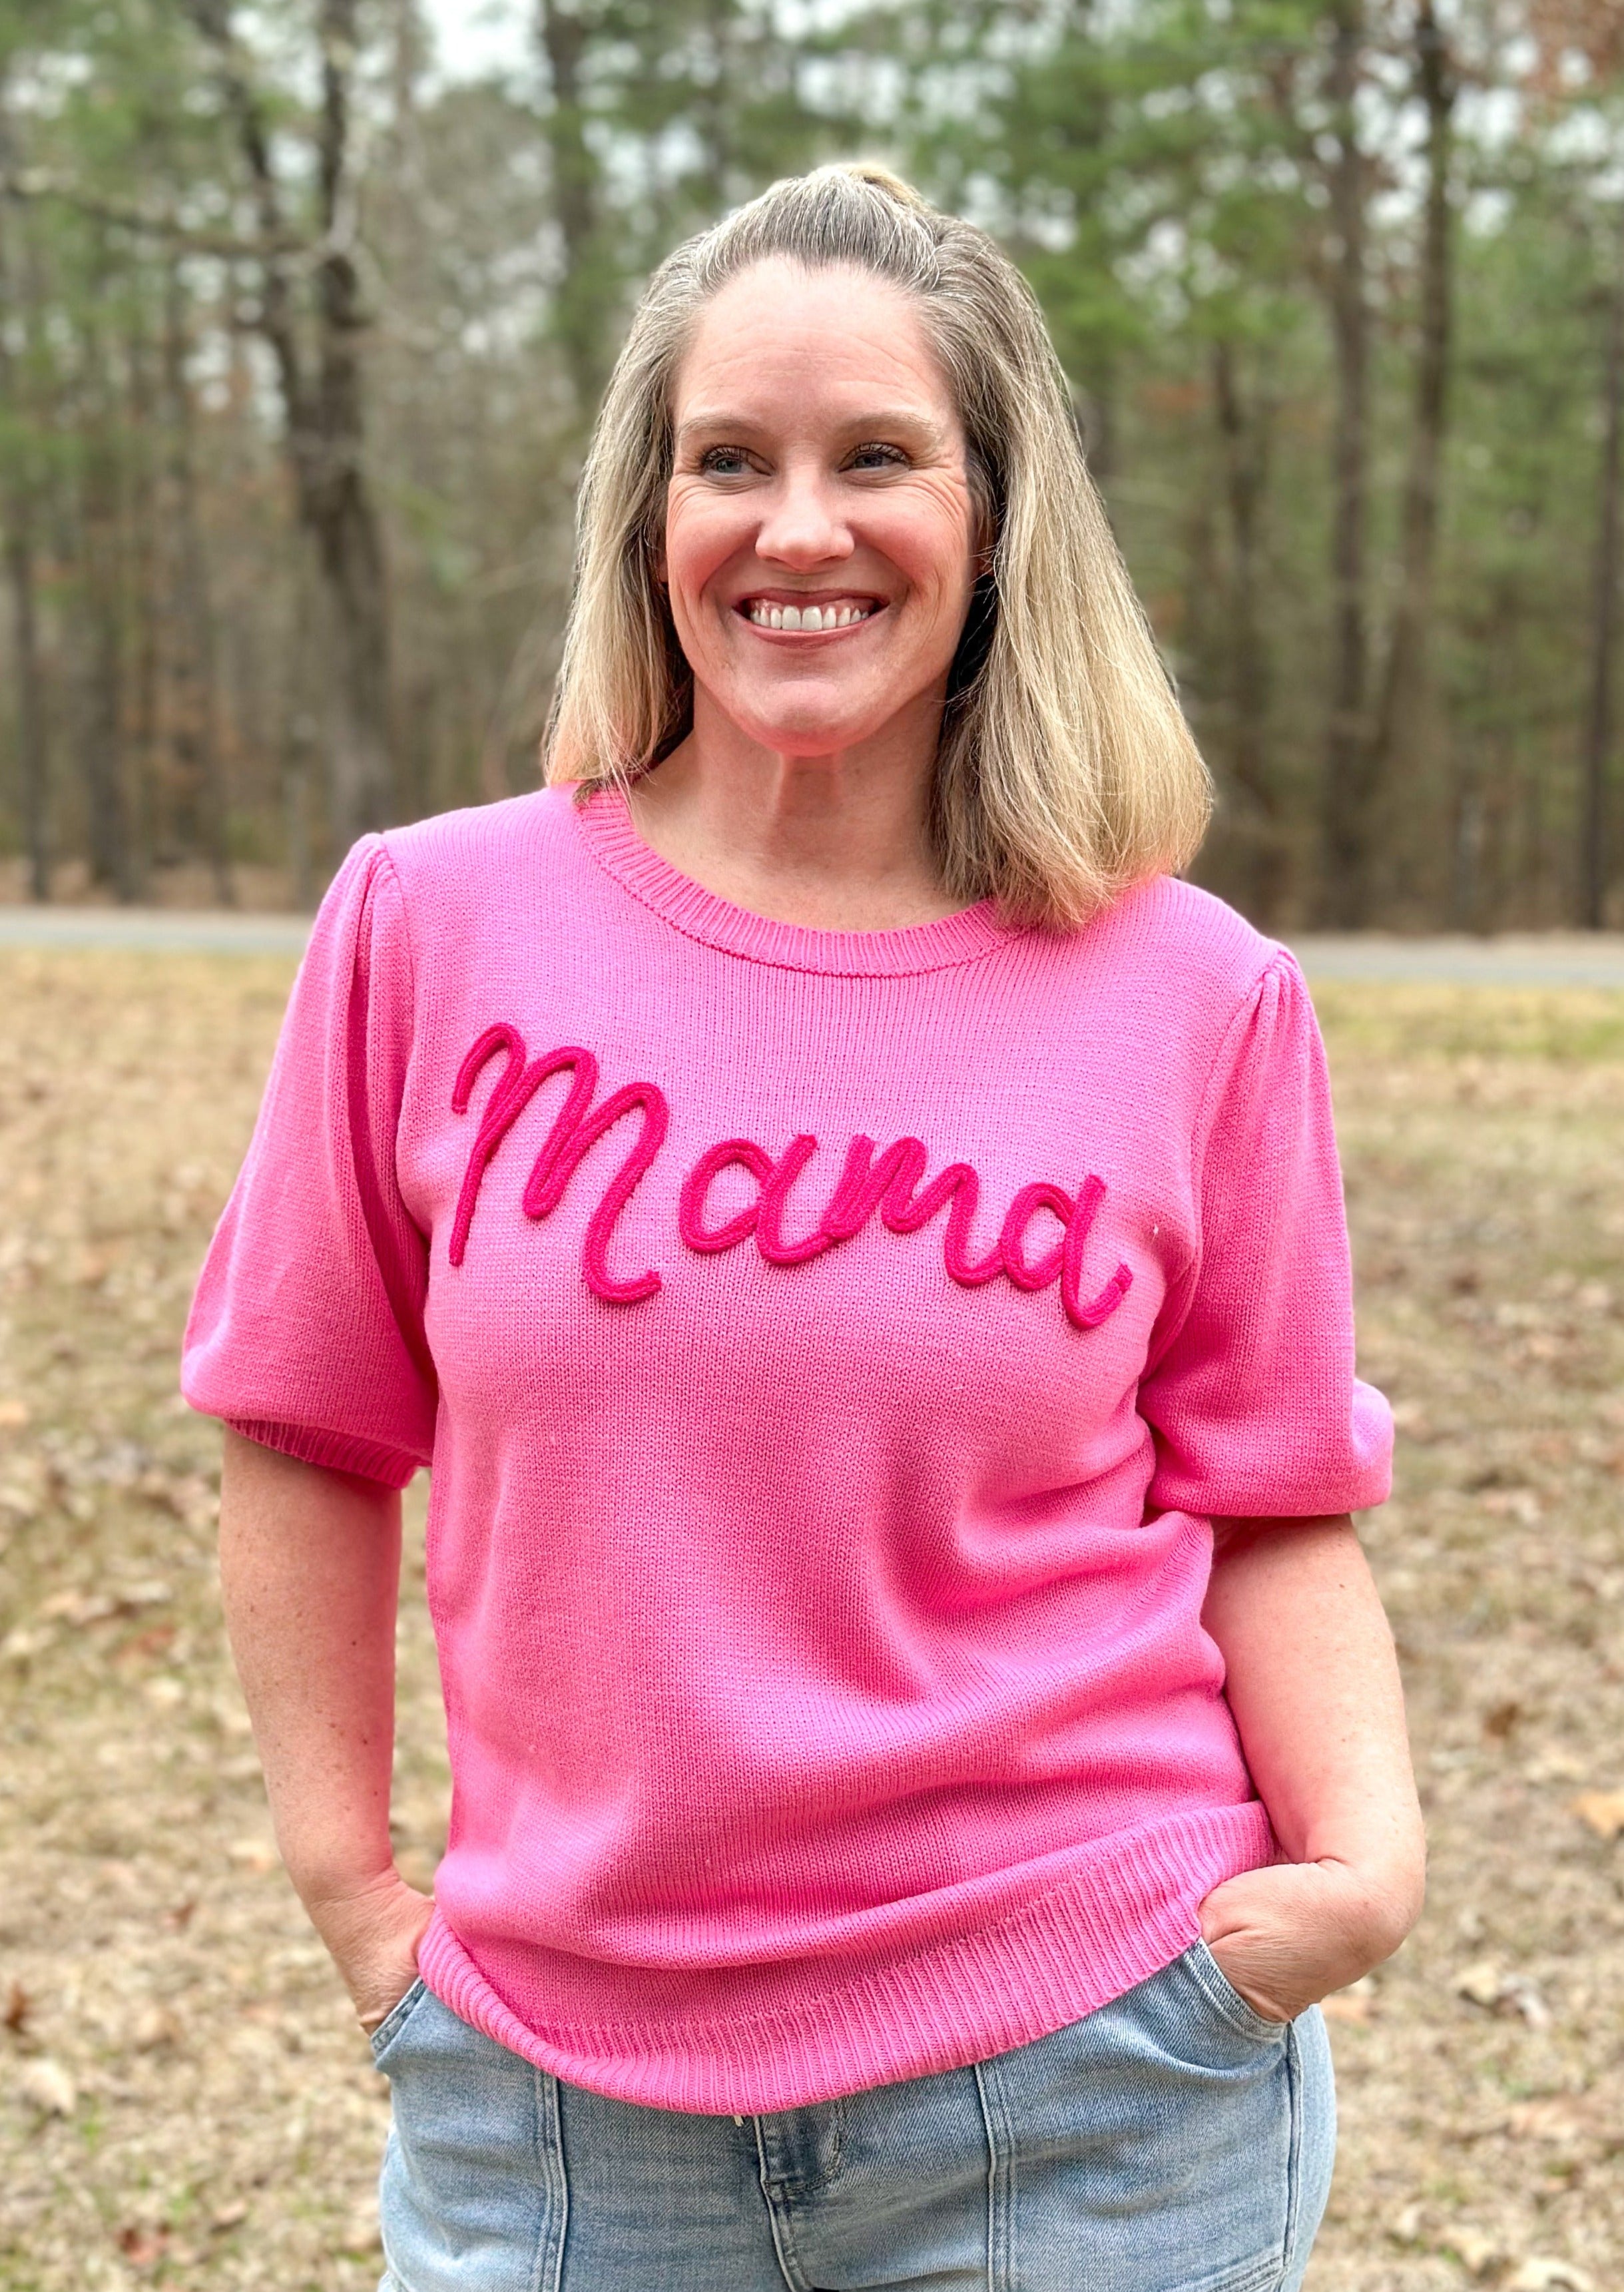 Short puff sleeve pink sweater with puff Mama across the front